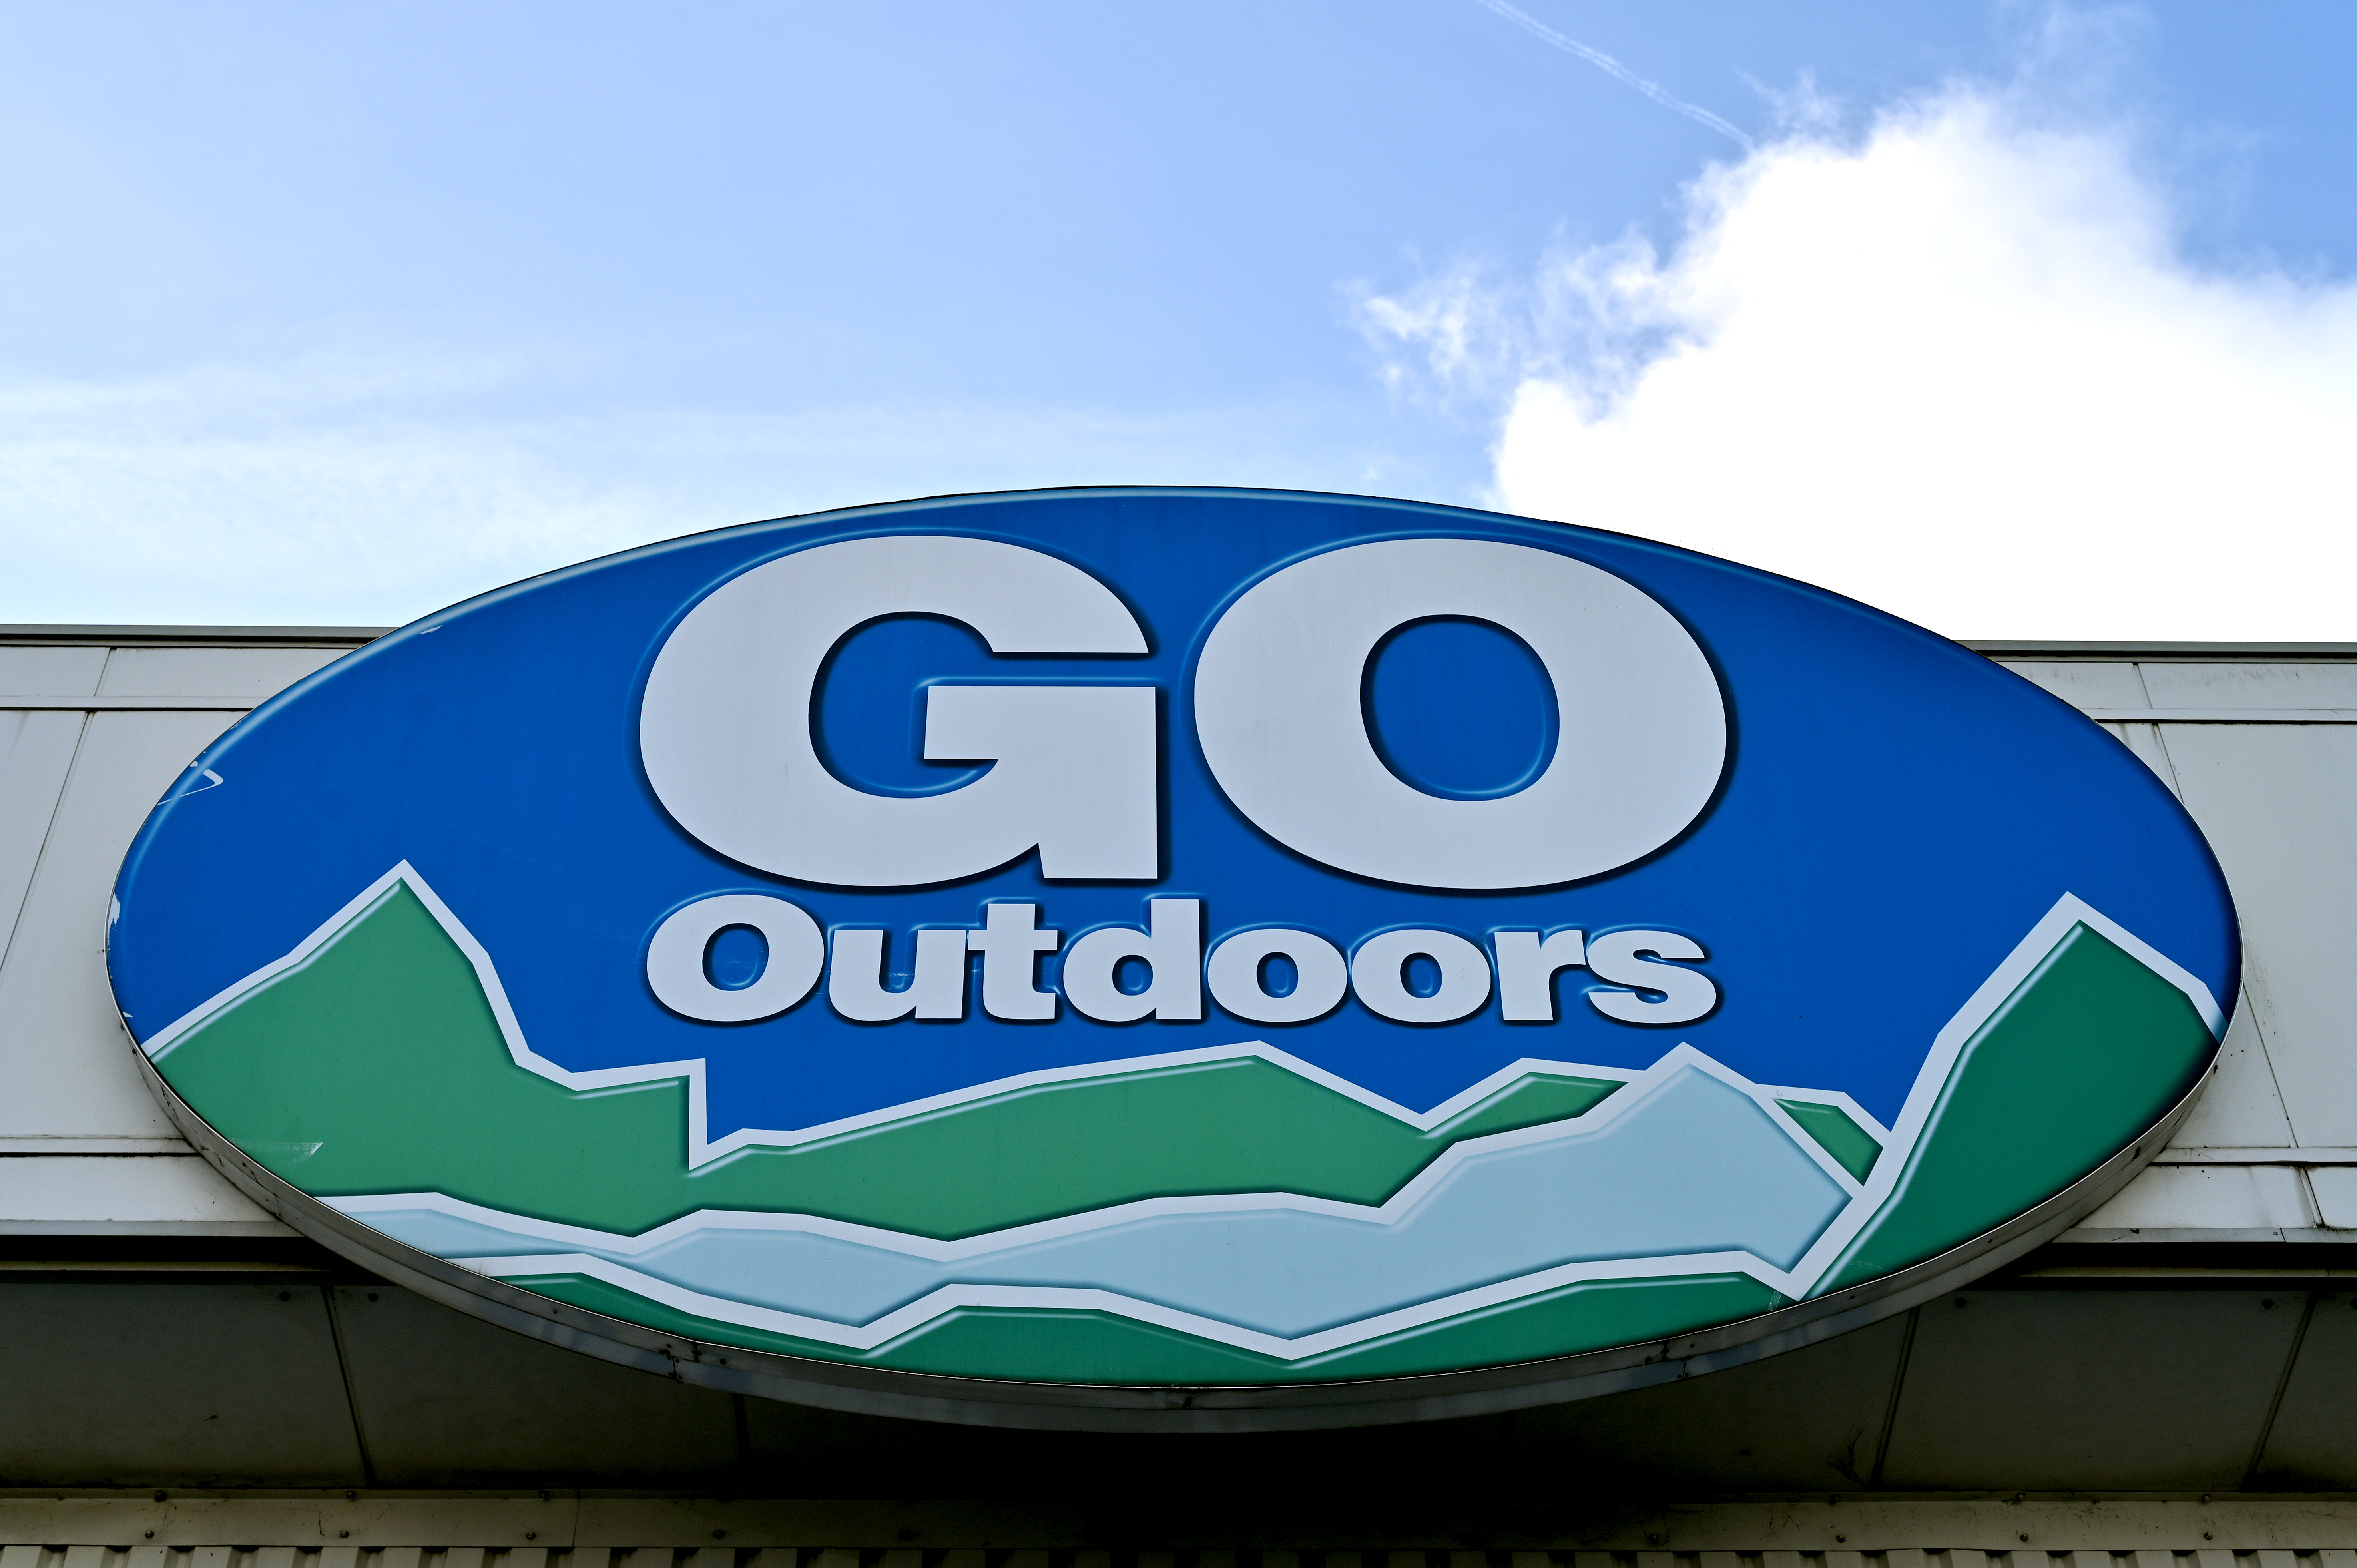 Go Outdoors sells equipment for travellers and sporting enthusiasts